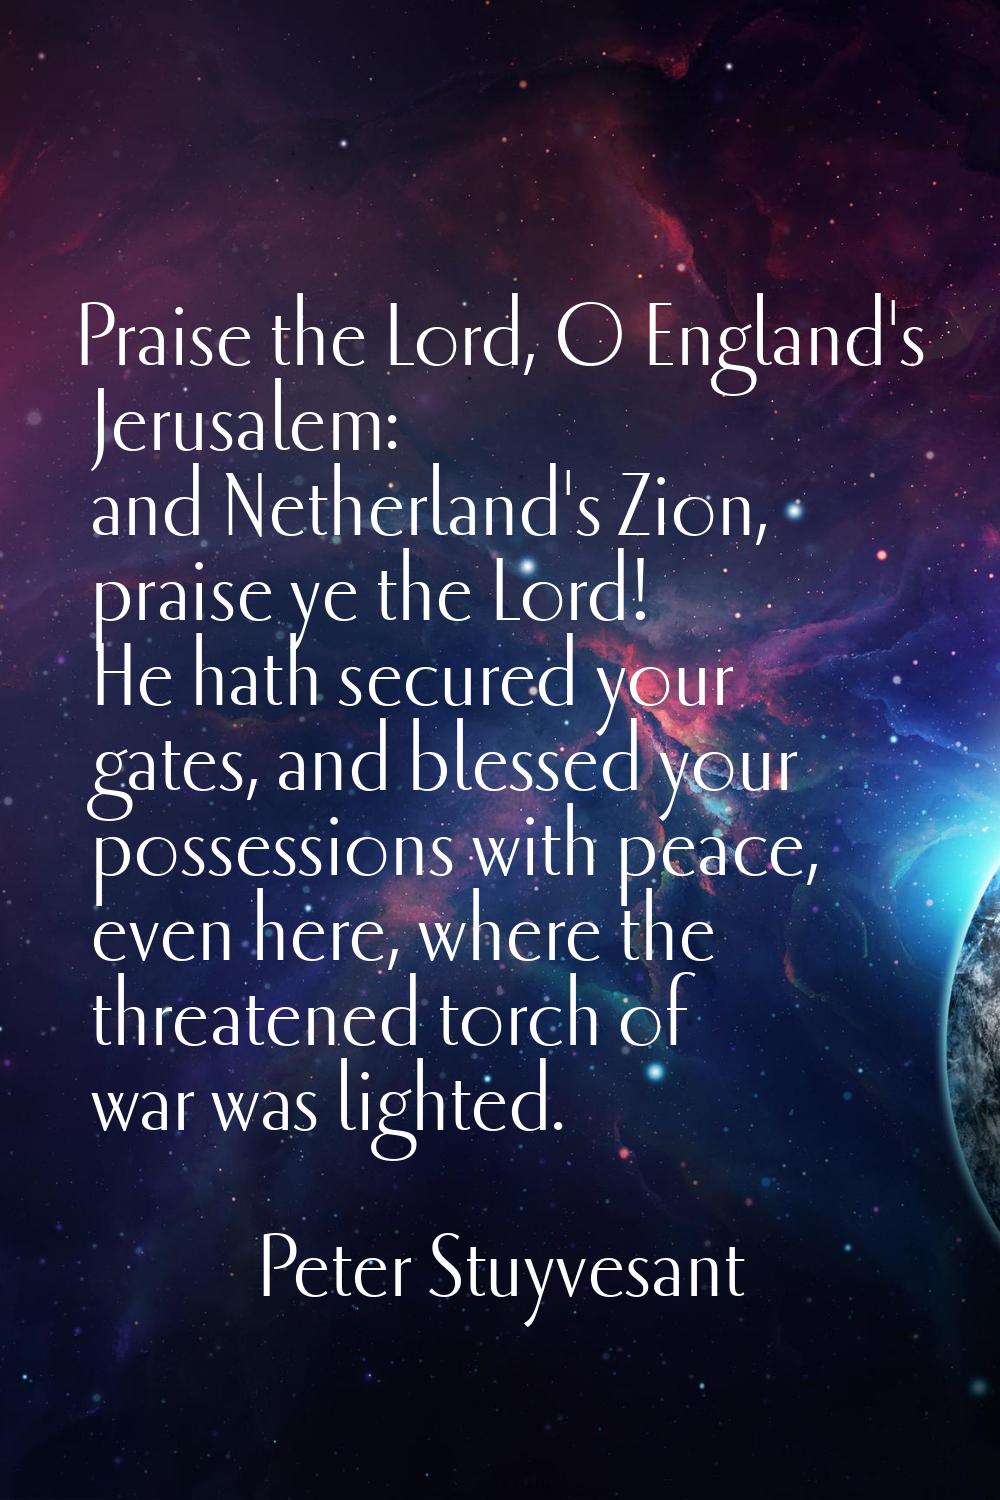 Praise the Lord, O England's Jerusalem: and Netherland's Zion, praise ye the Lord! He hath secured 